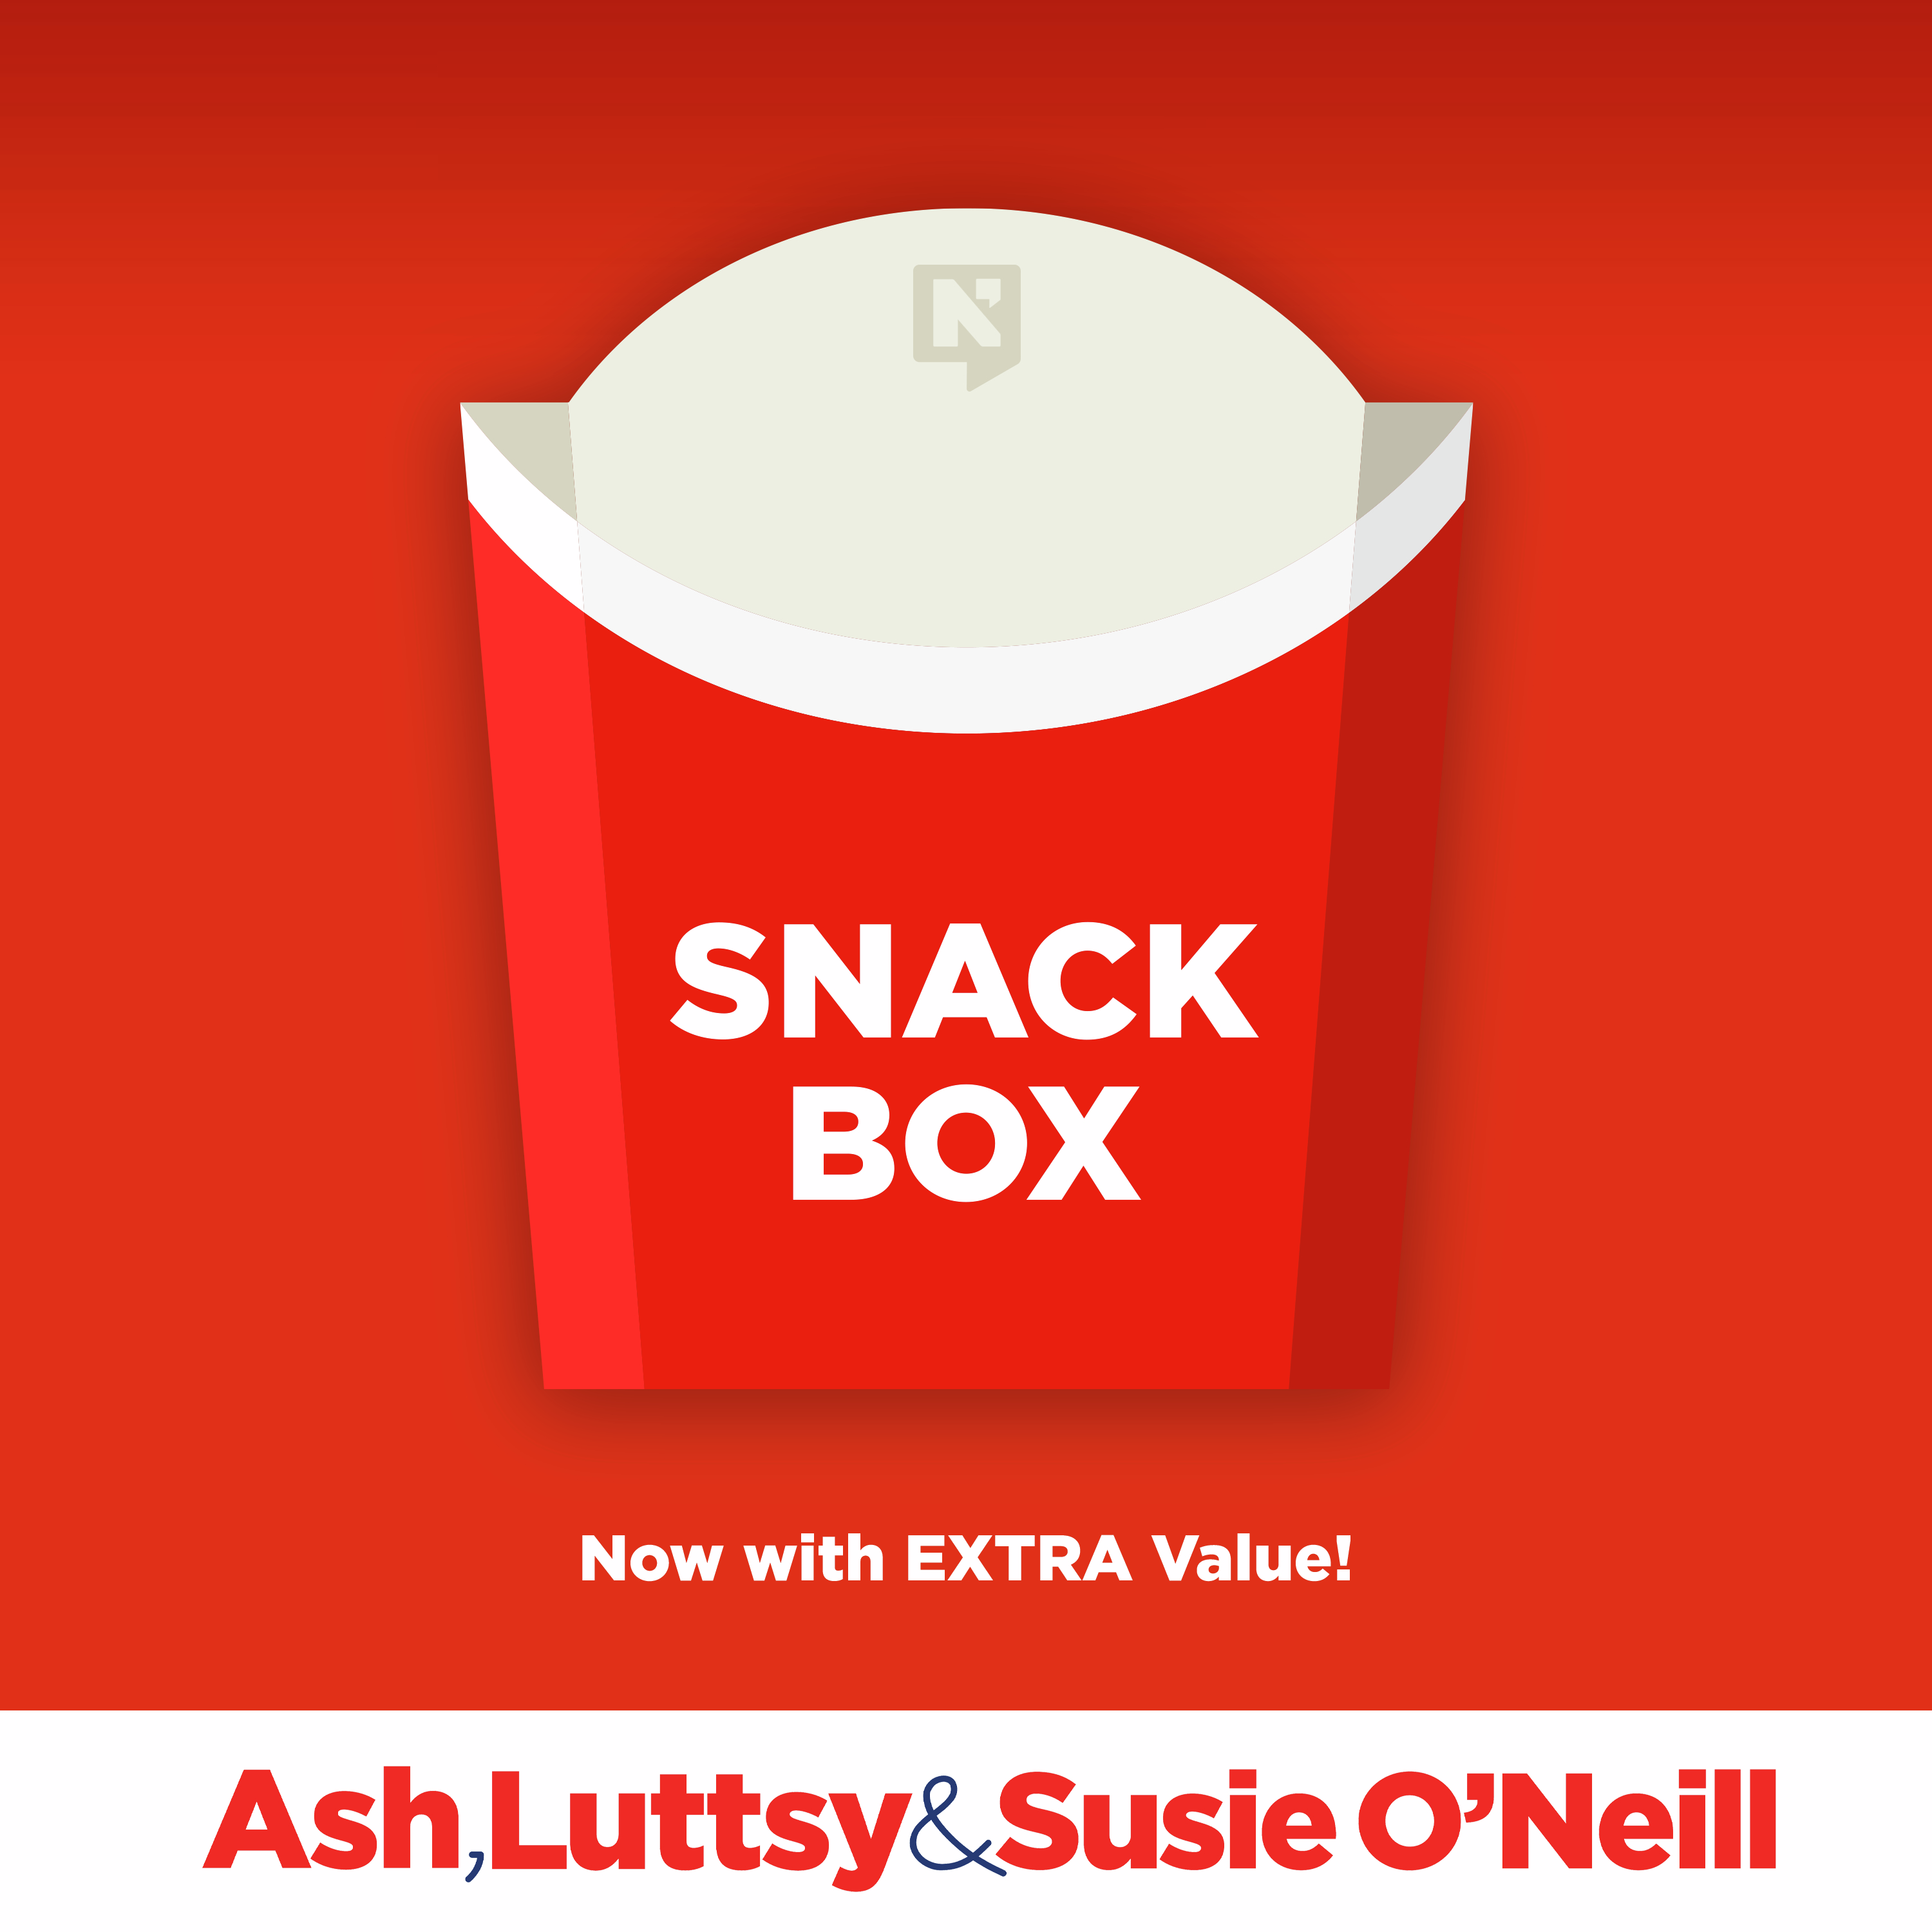 The Ash, Luttsy and Susie Snackbox | Thursday 23rd May